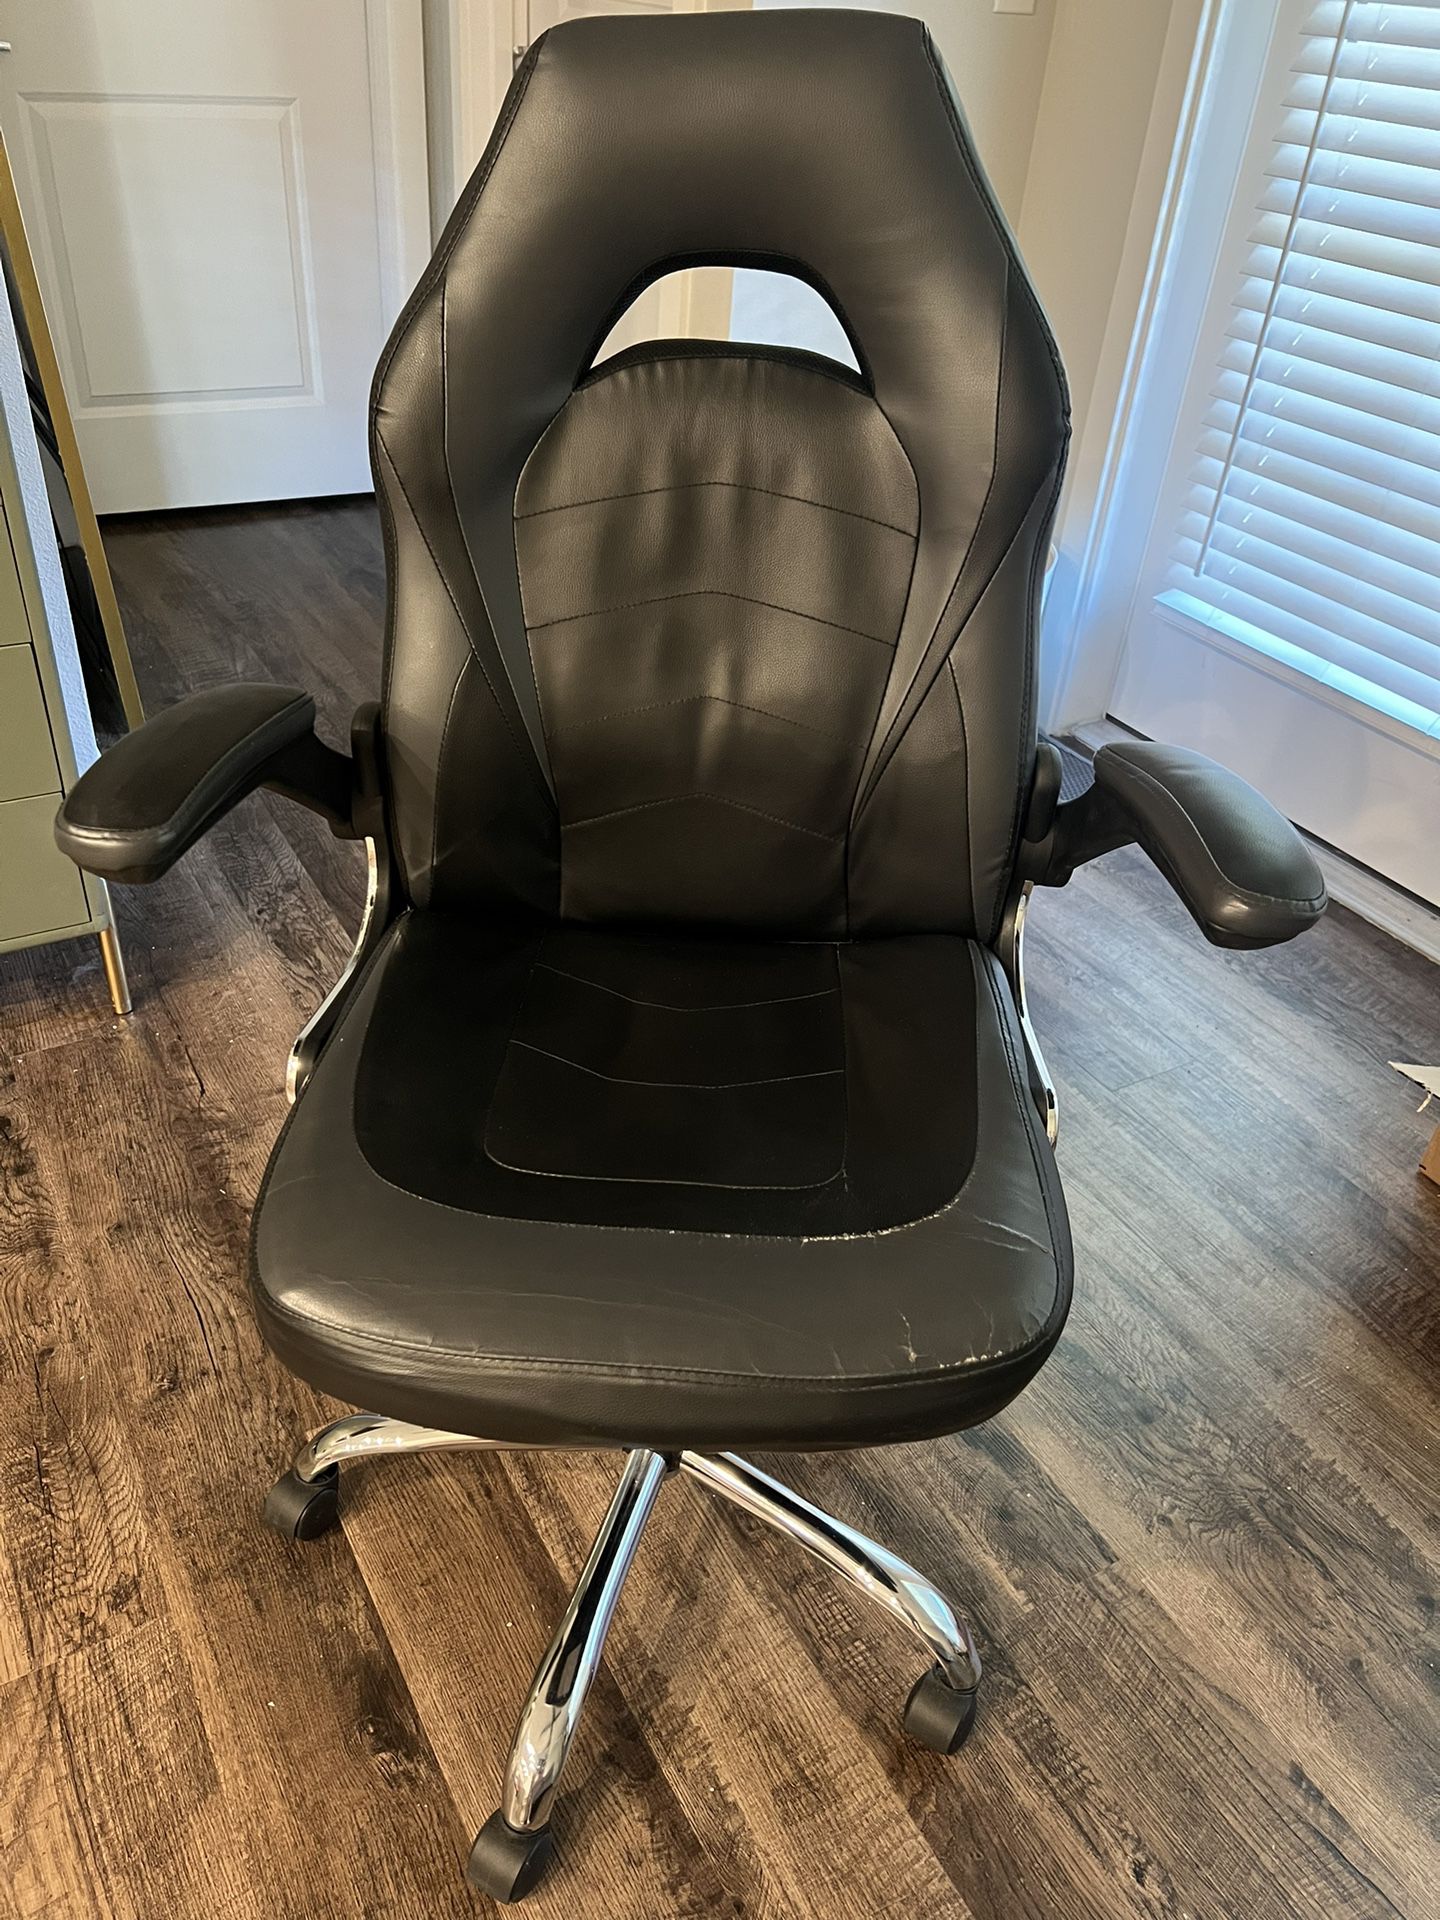 Gaming / Office Chair - Adjustable